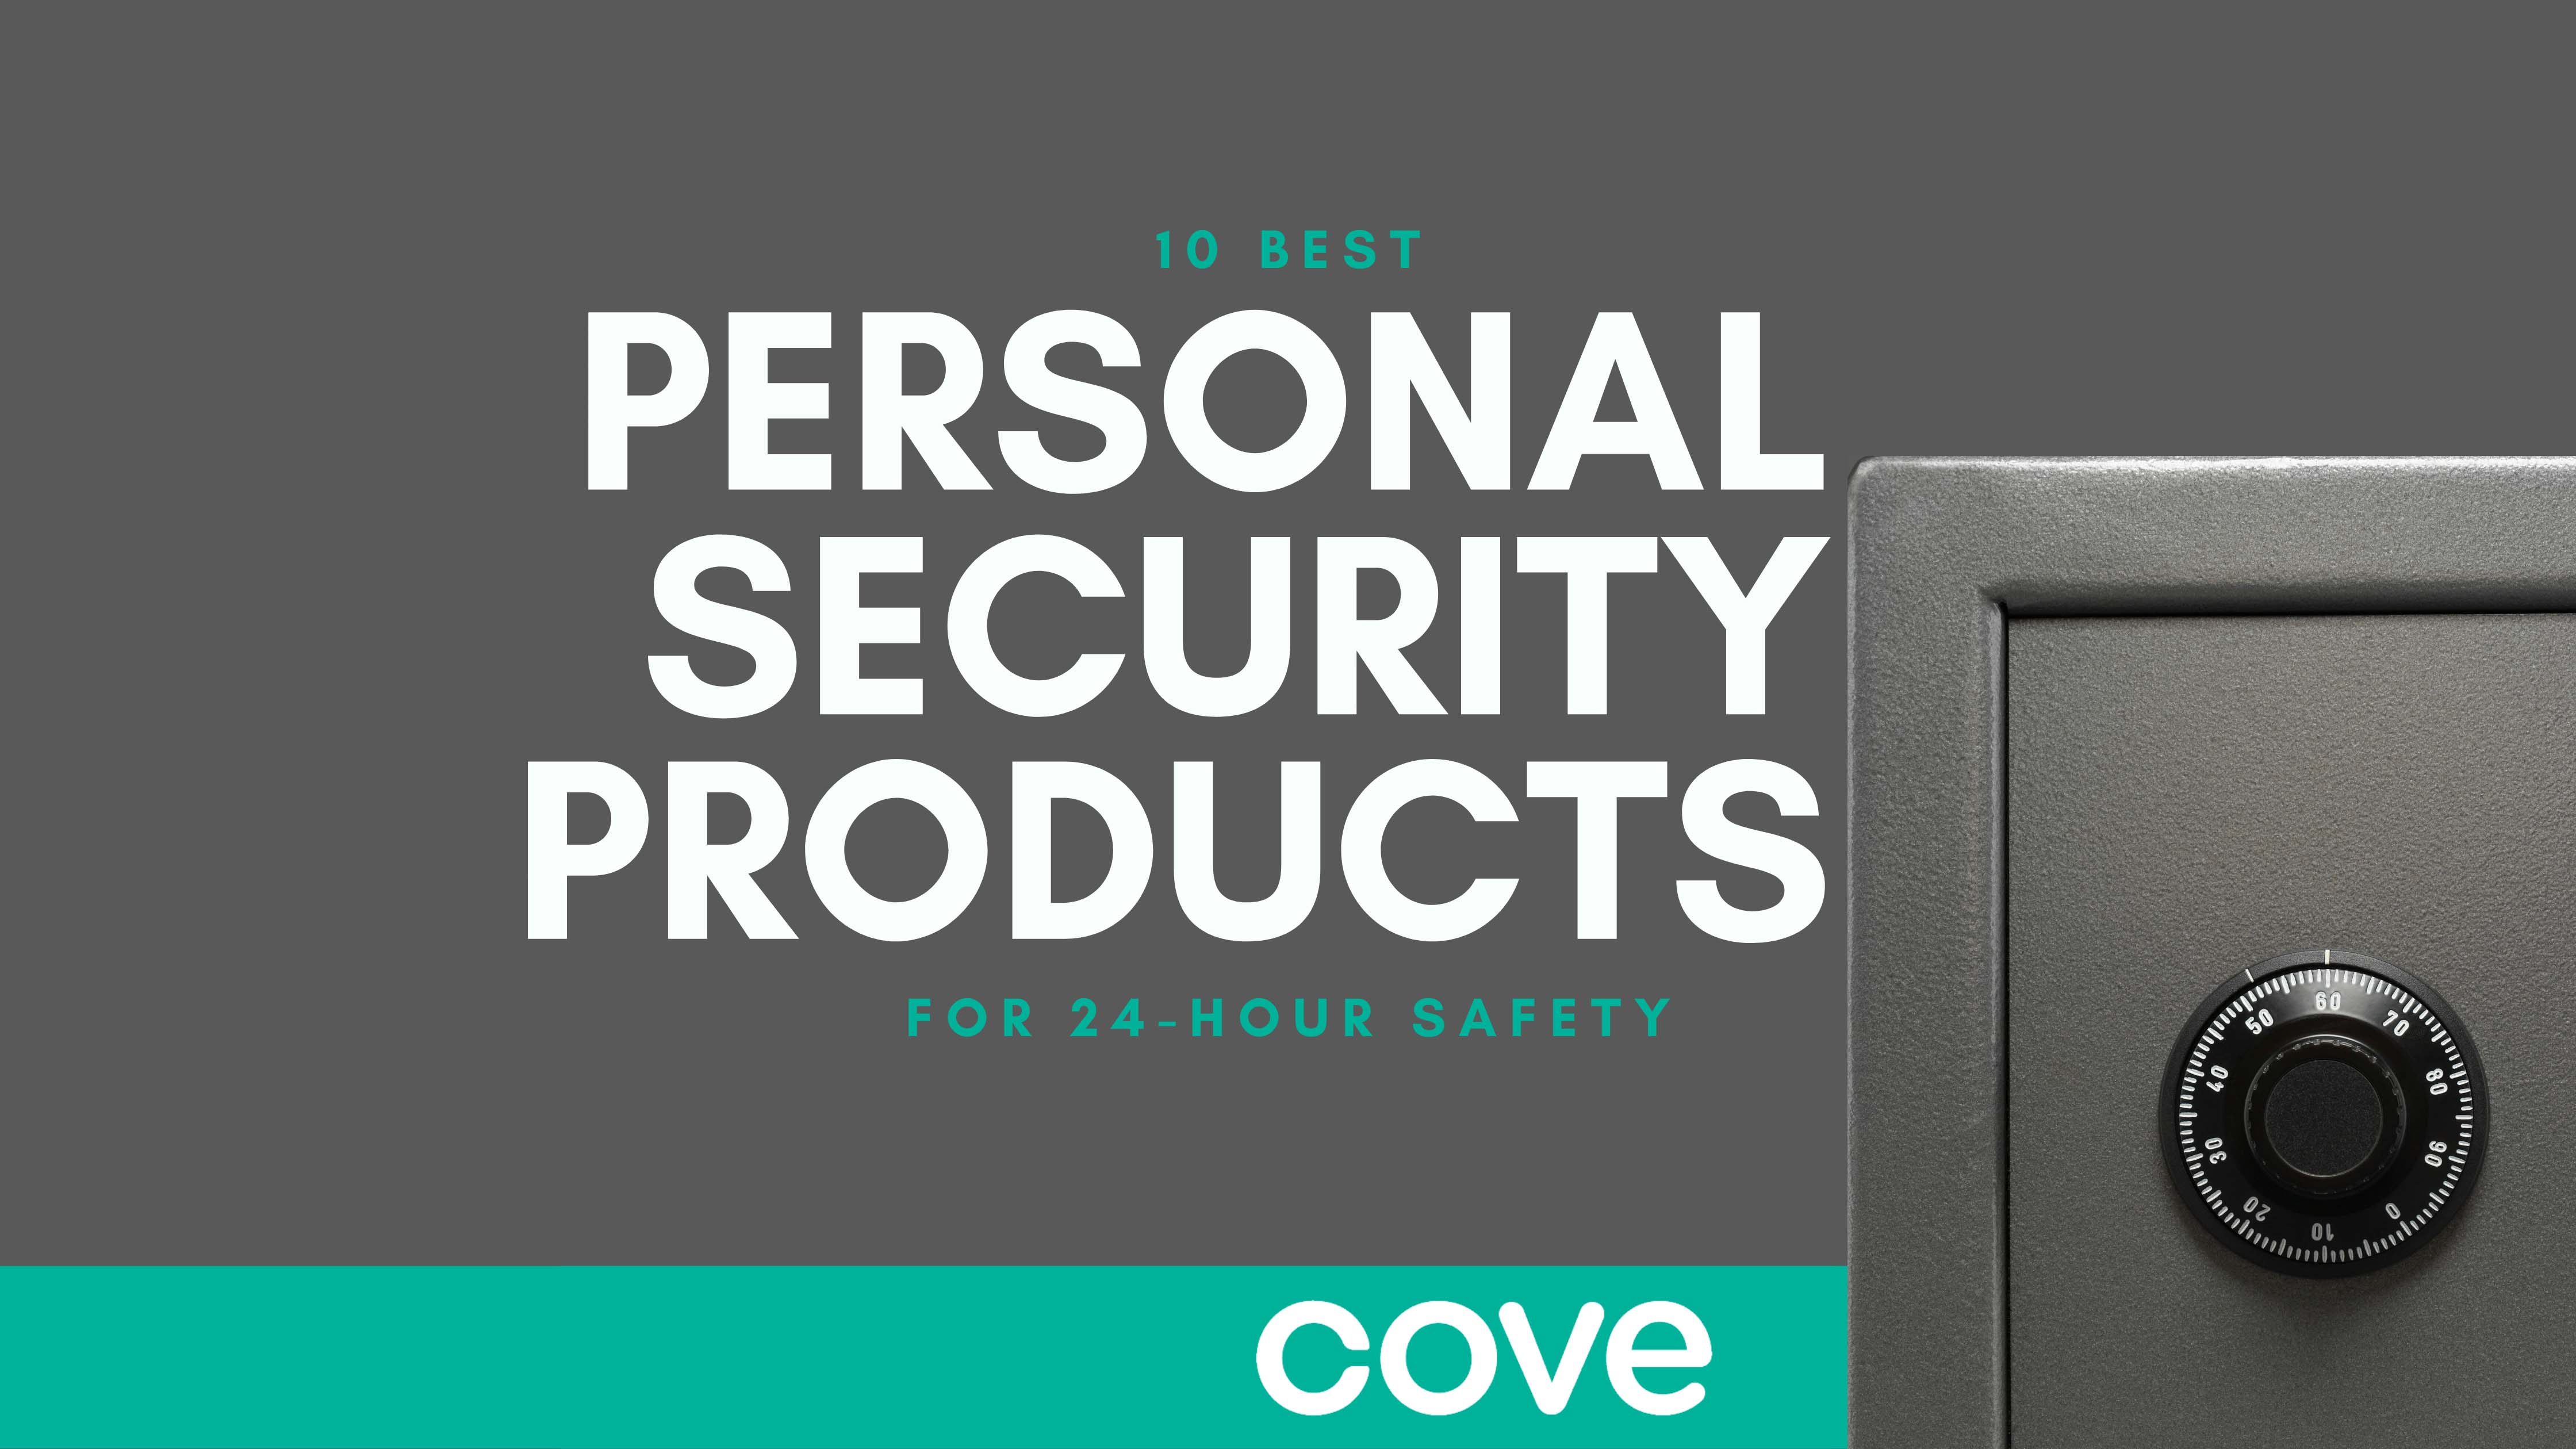 10 best personal security products for 24 hour safety